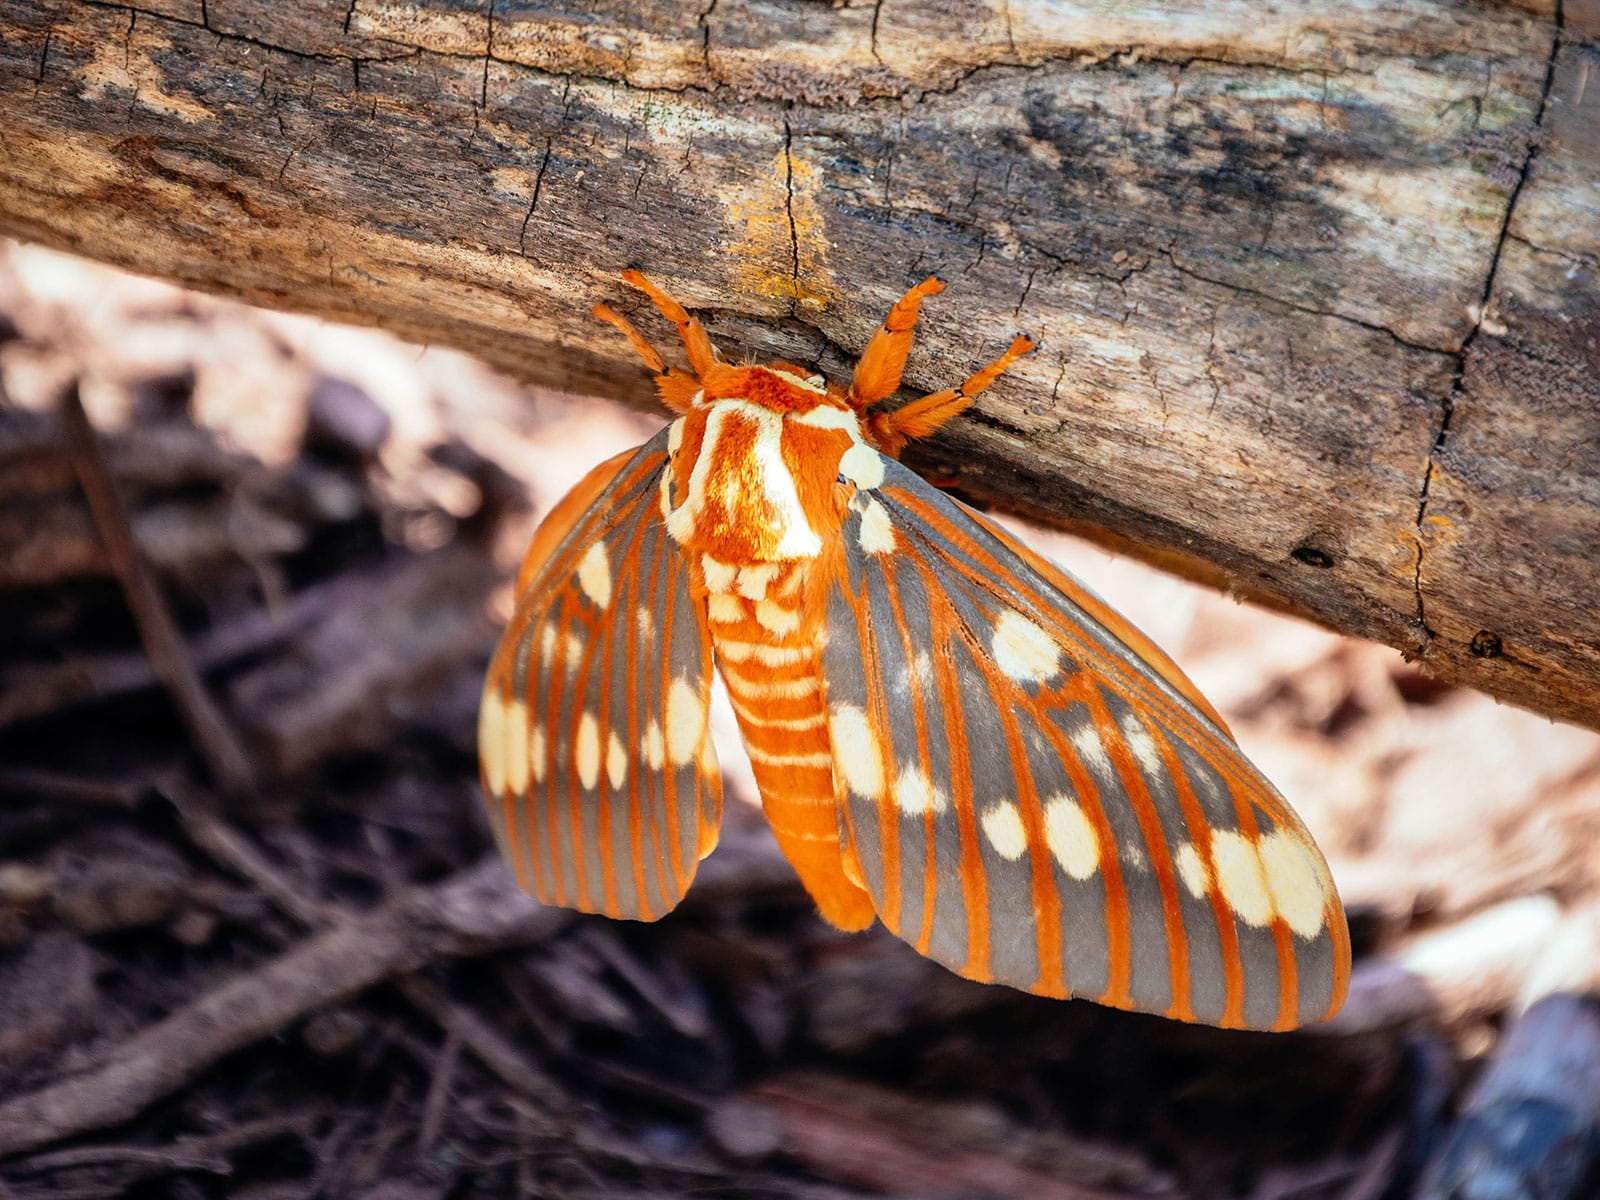 Regal moth perched on the side of a log